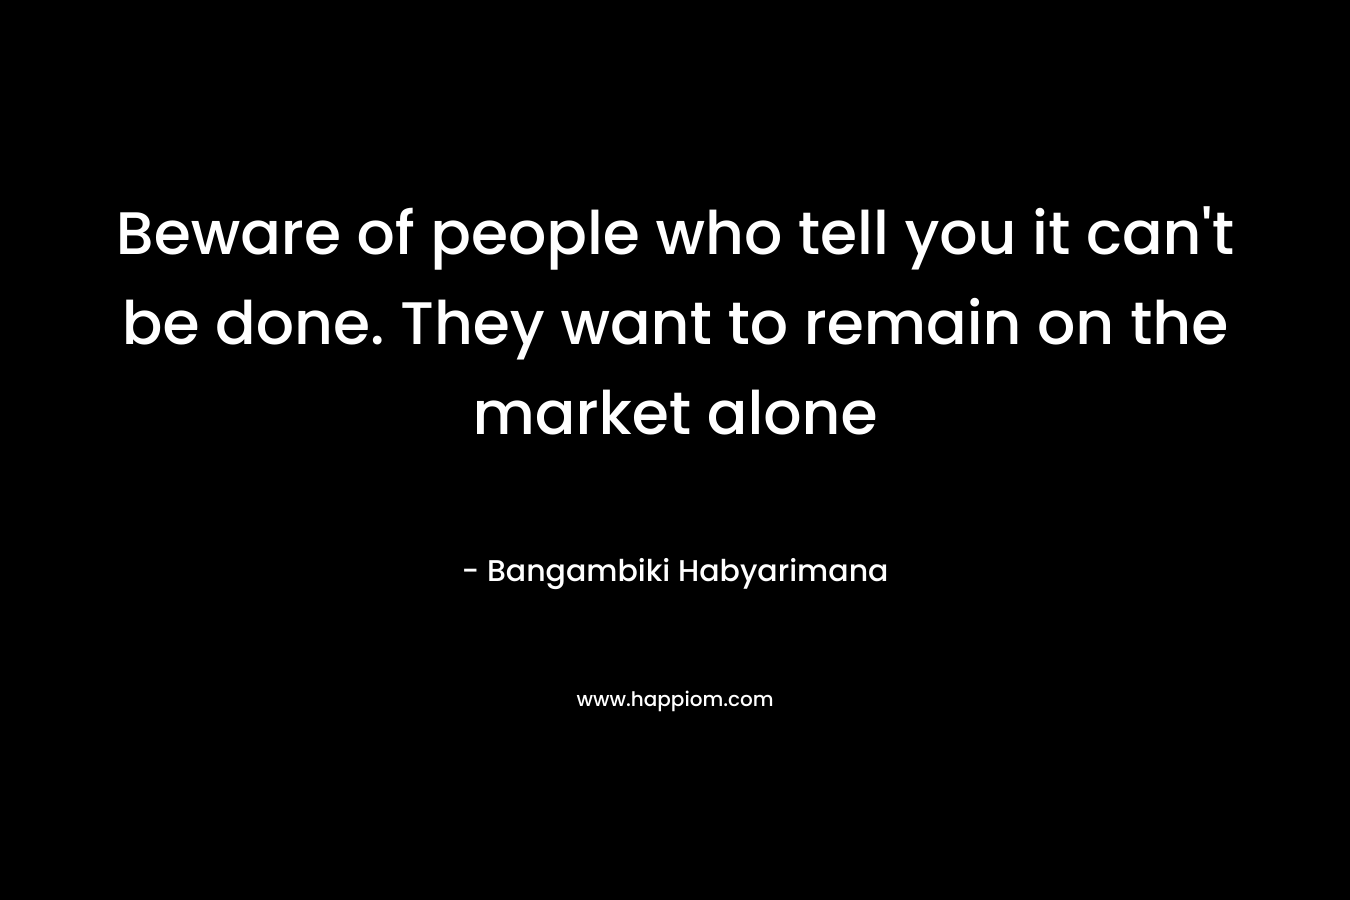 Beware of people who tell you it can't be done. They want to remain on the market alone